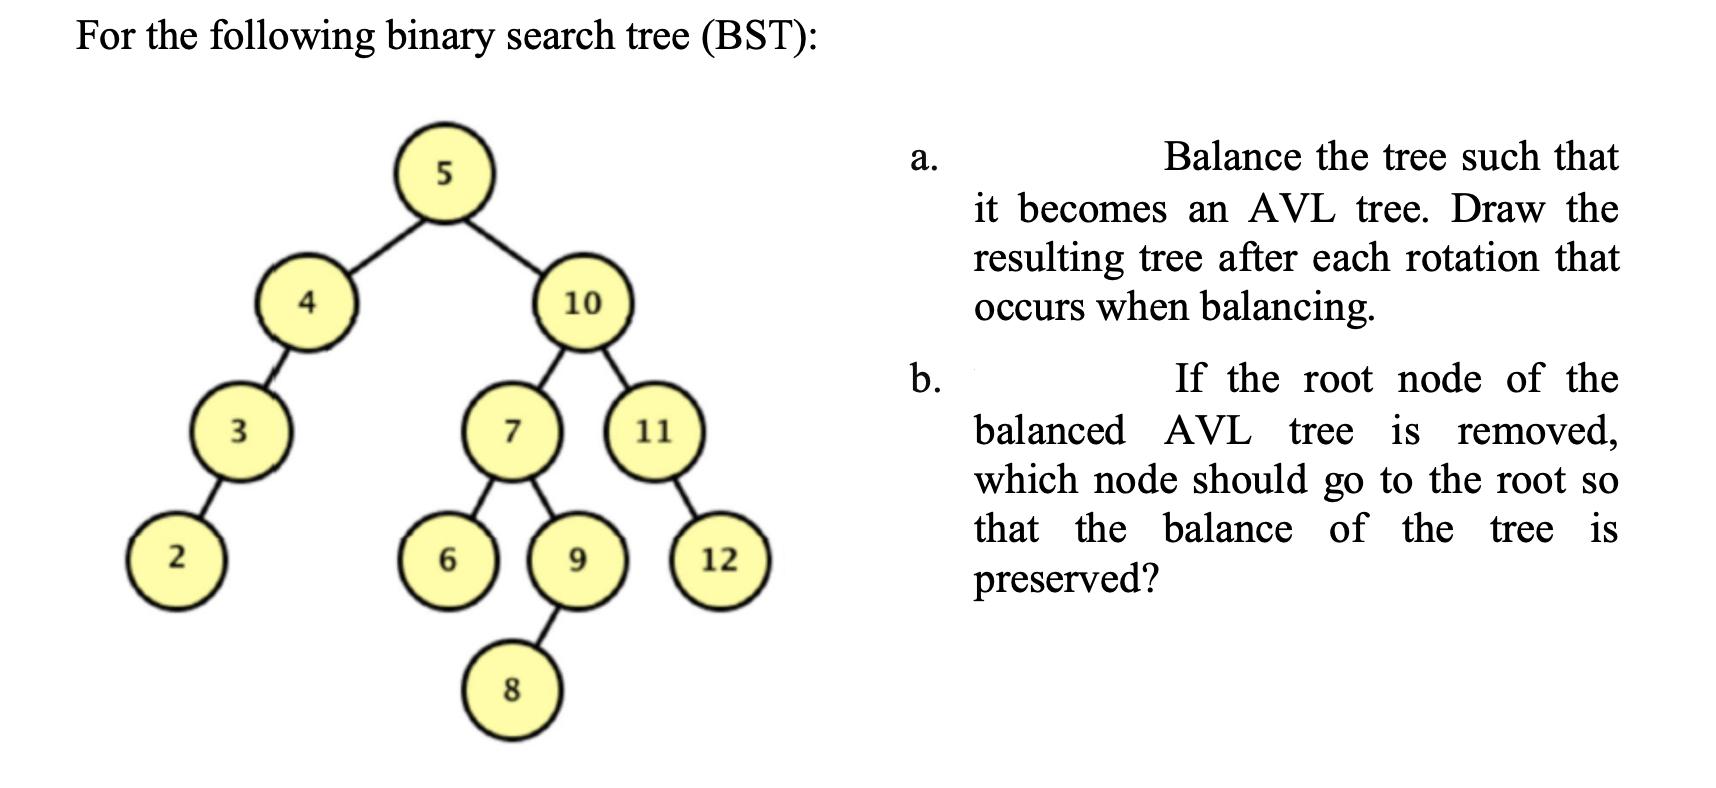 For the following binary search tree (BST): 2 3 5 6 7 8 10 9 11 12 a. b. Balance the tree such that it